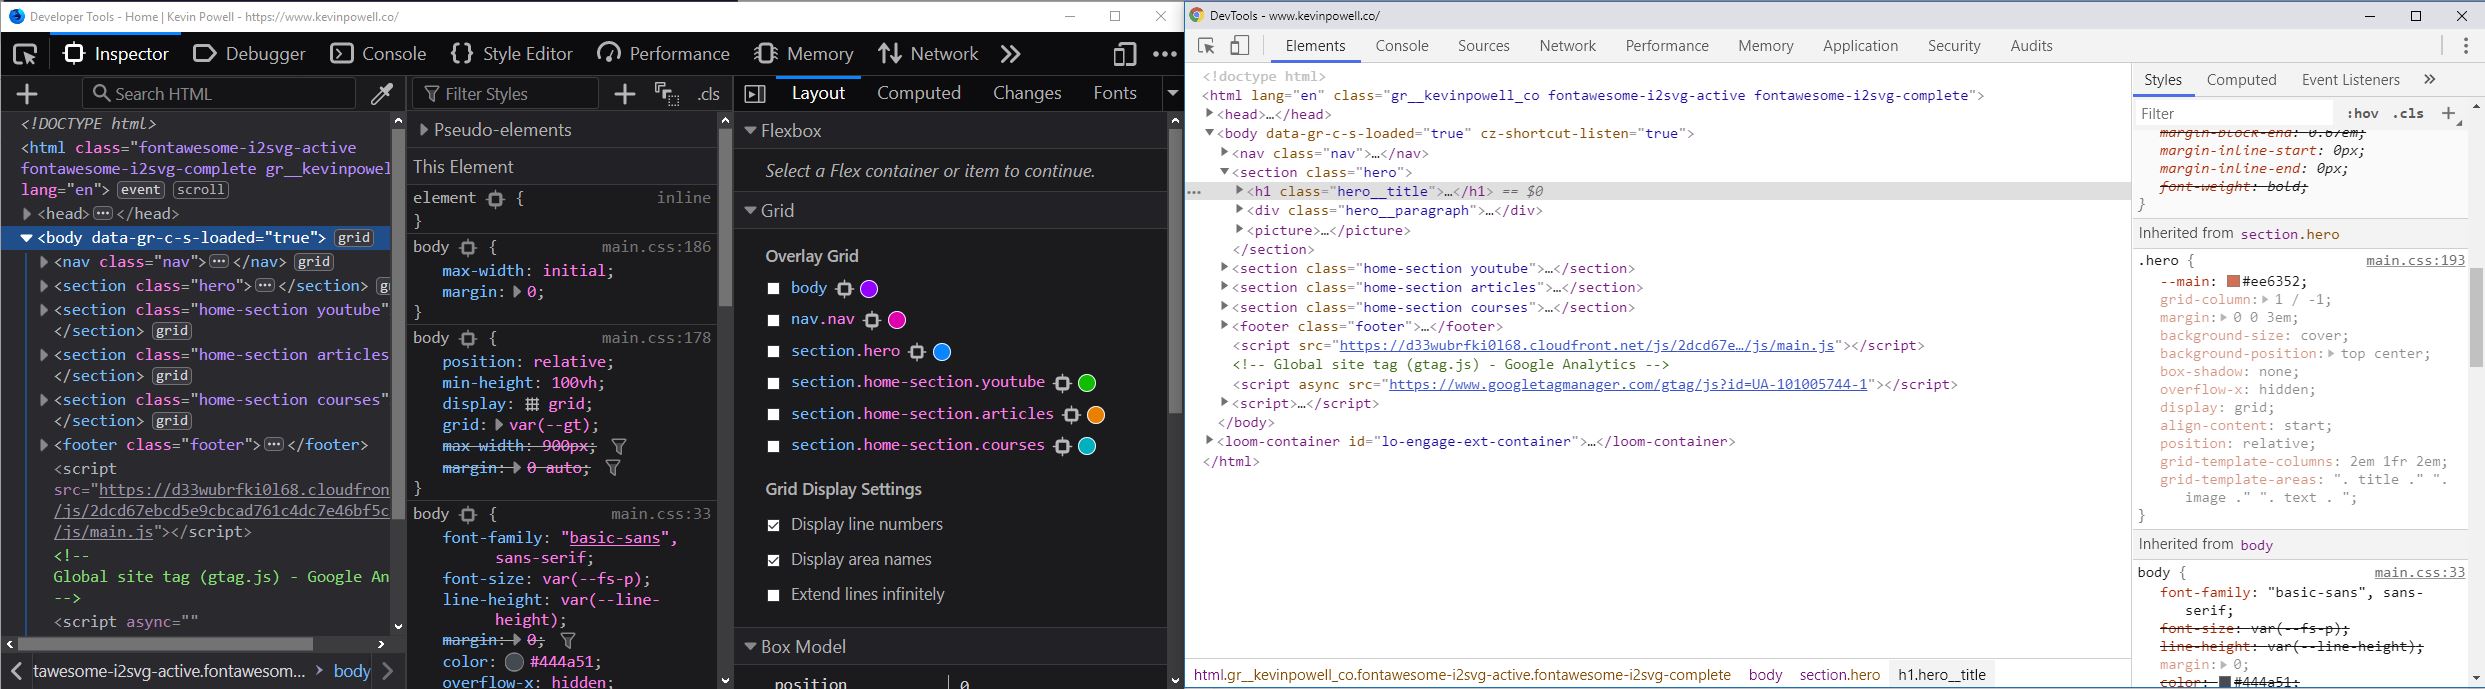 both Firefox and Chrome's devtools